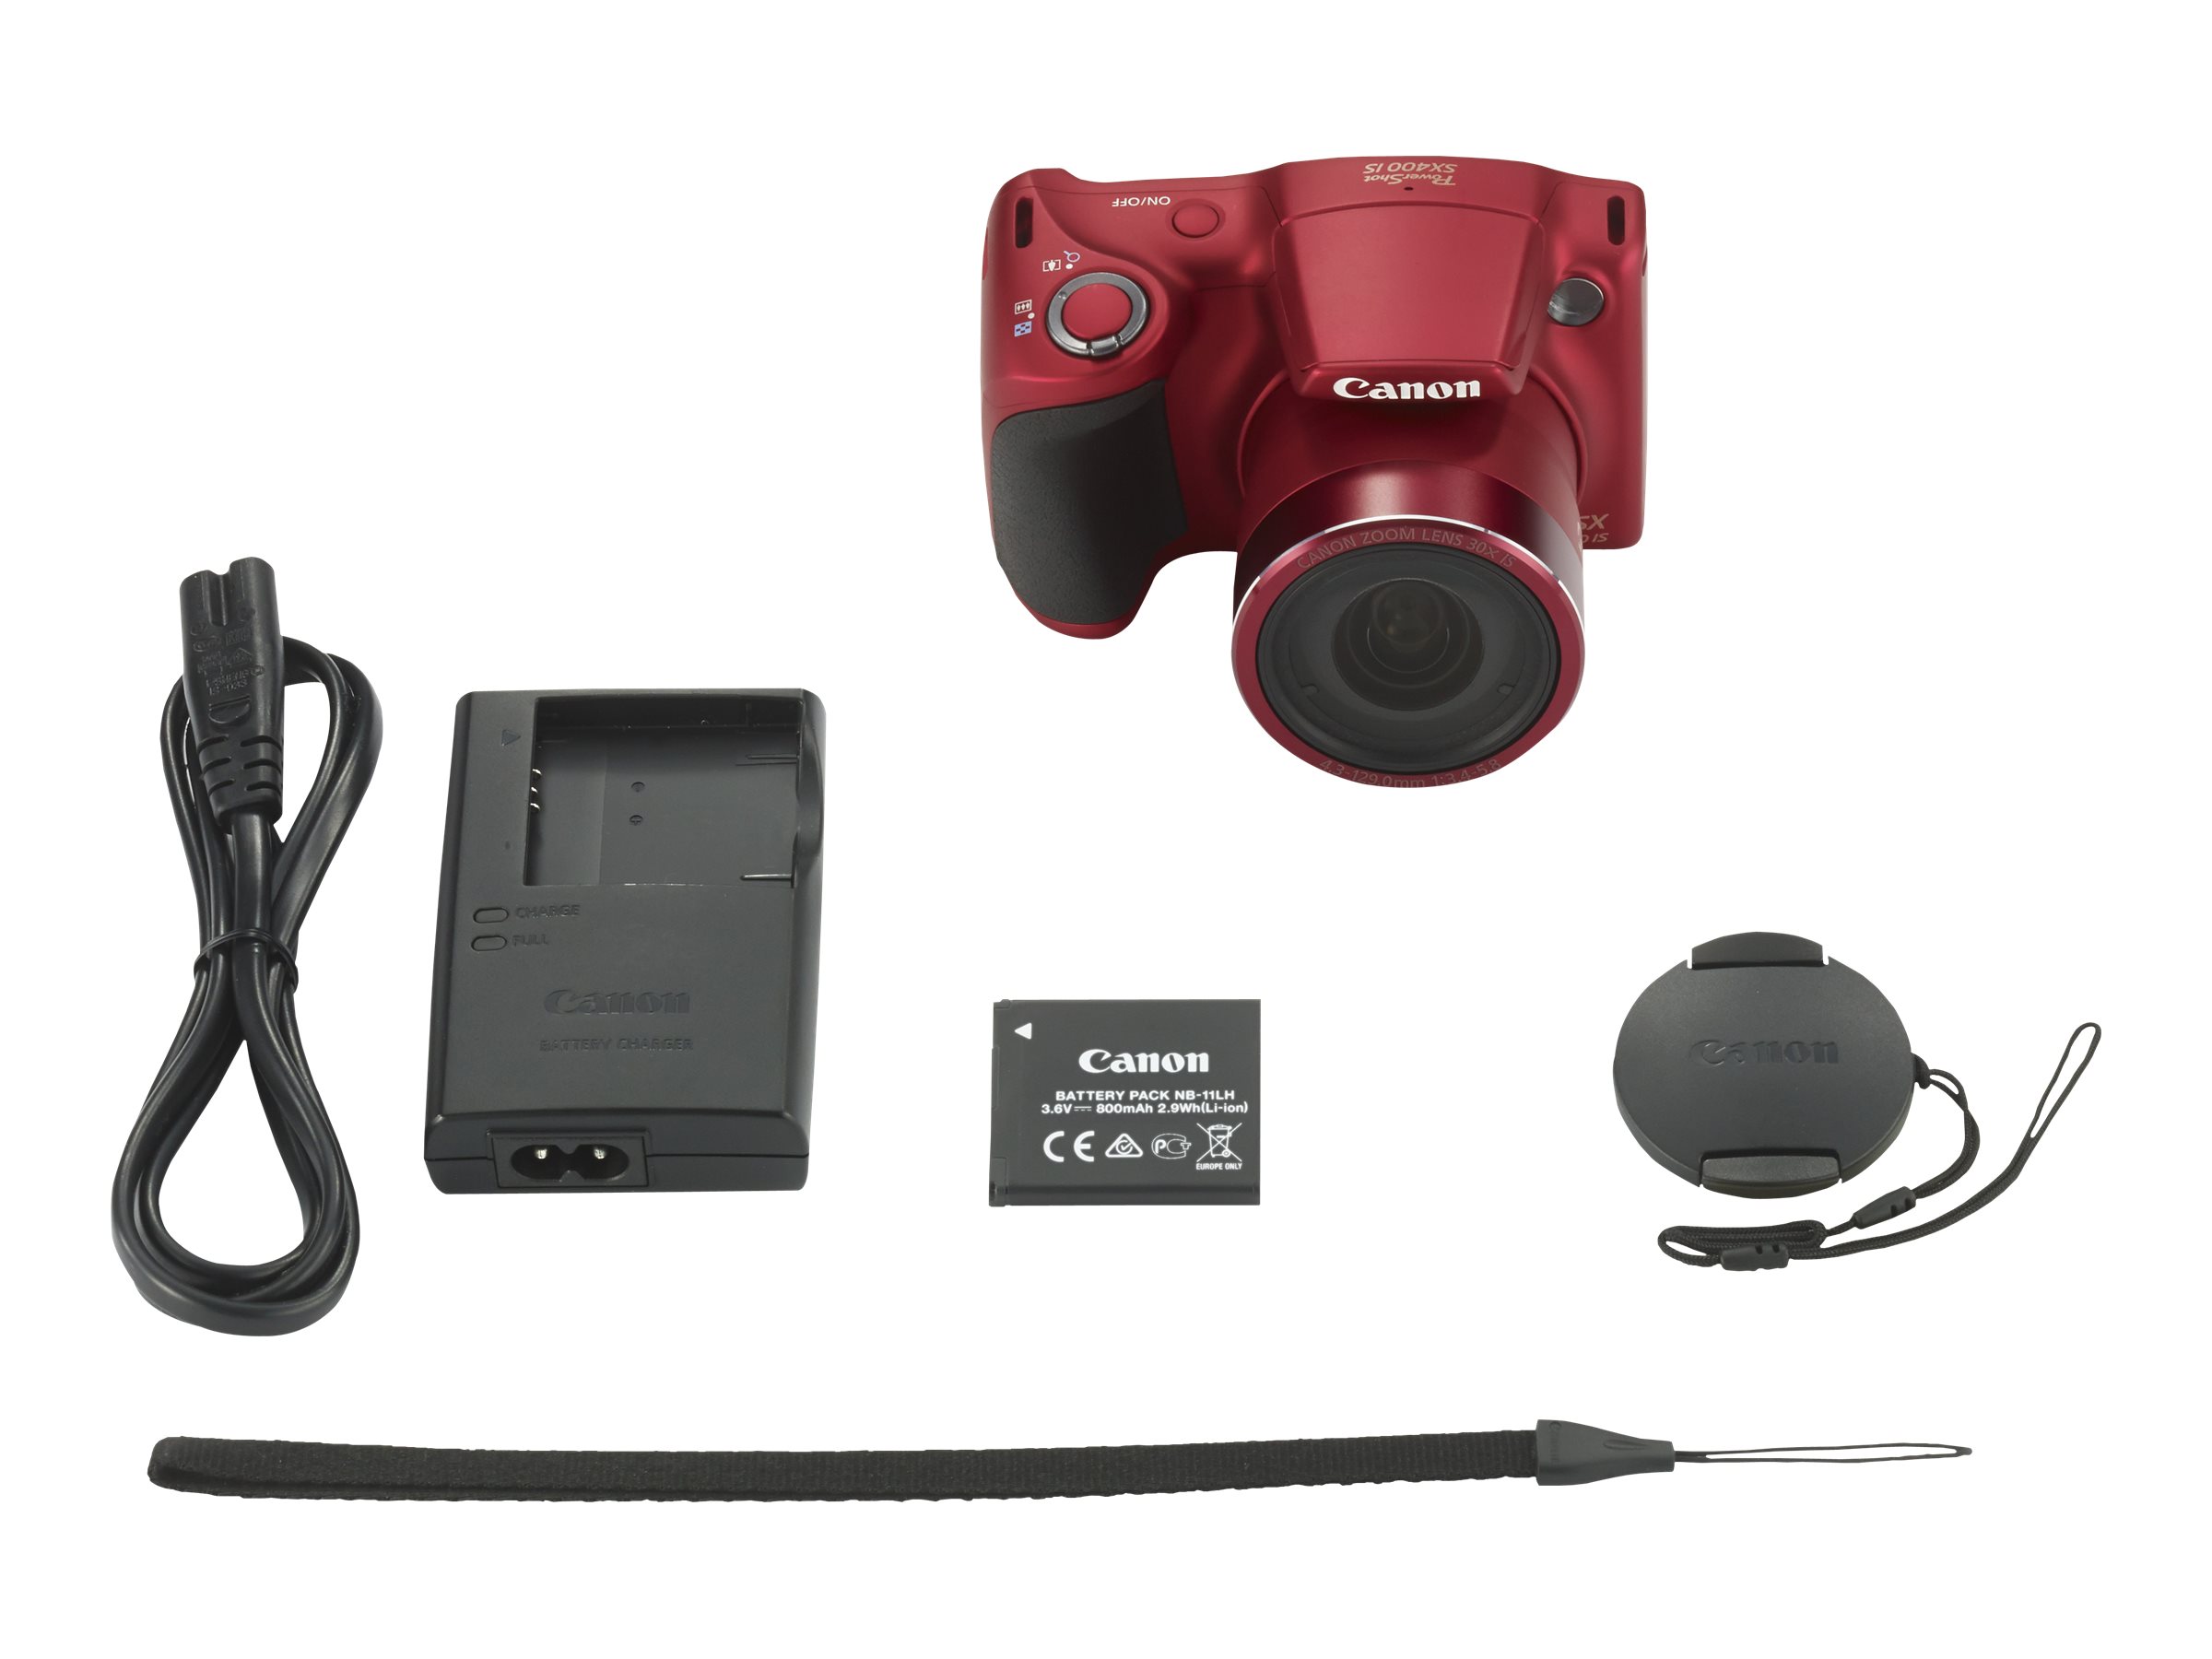 Canon PowerShot SX400 IS - Digital camera - High Definition - compact - 16.0 MP - 30 x optical zoom - red - image 56 of 72